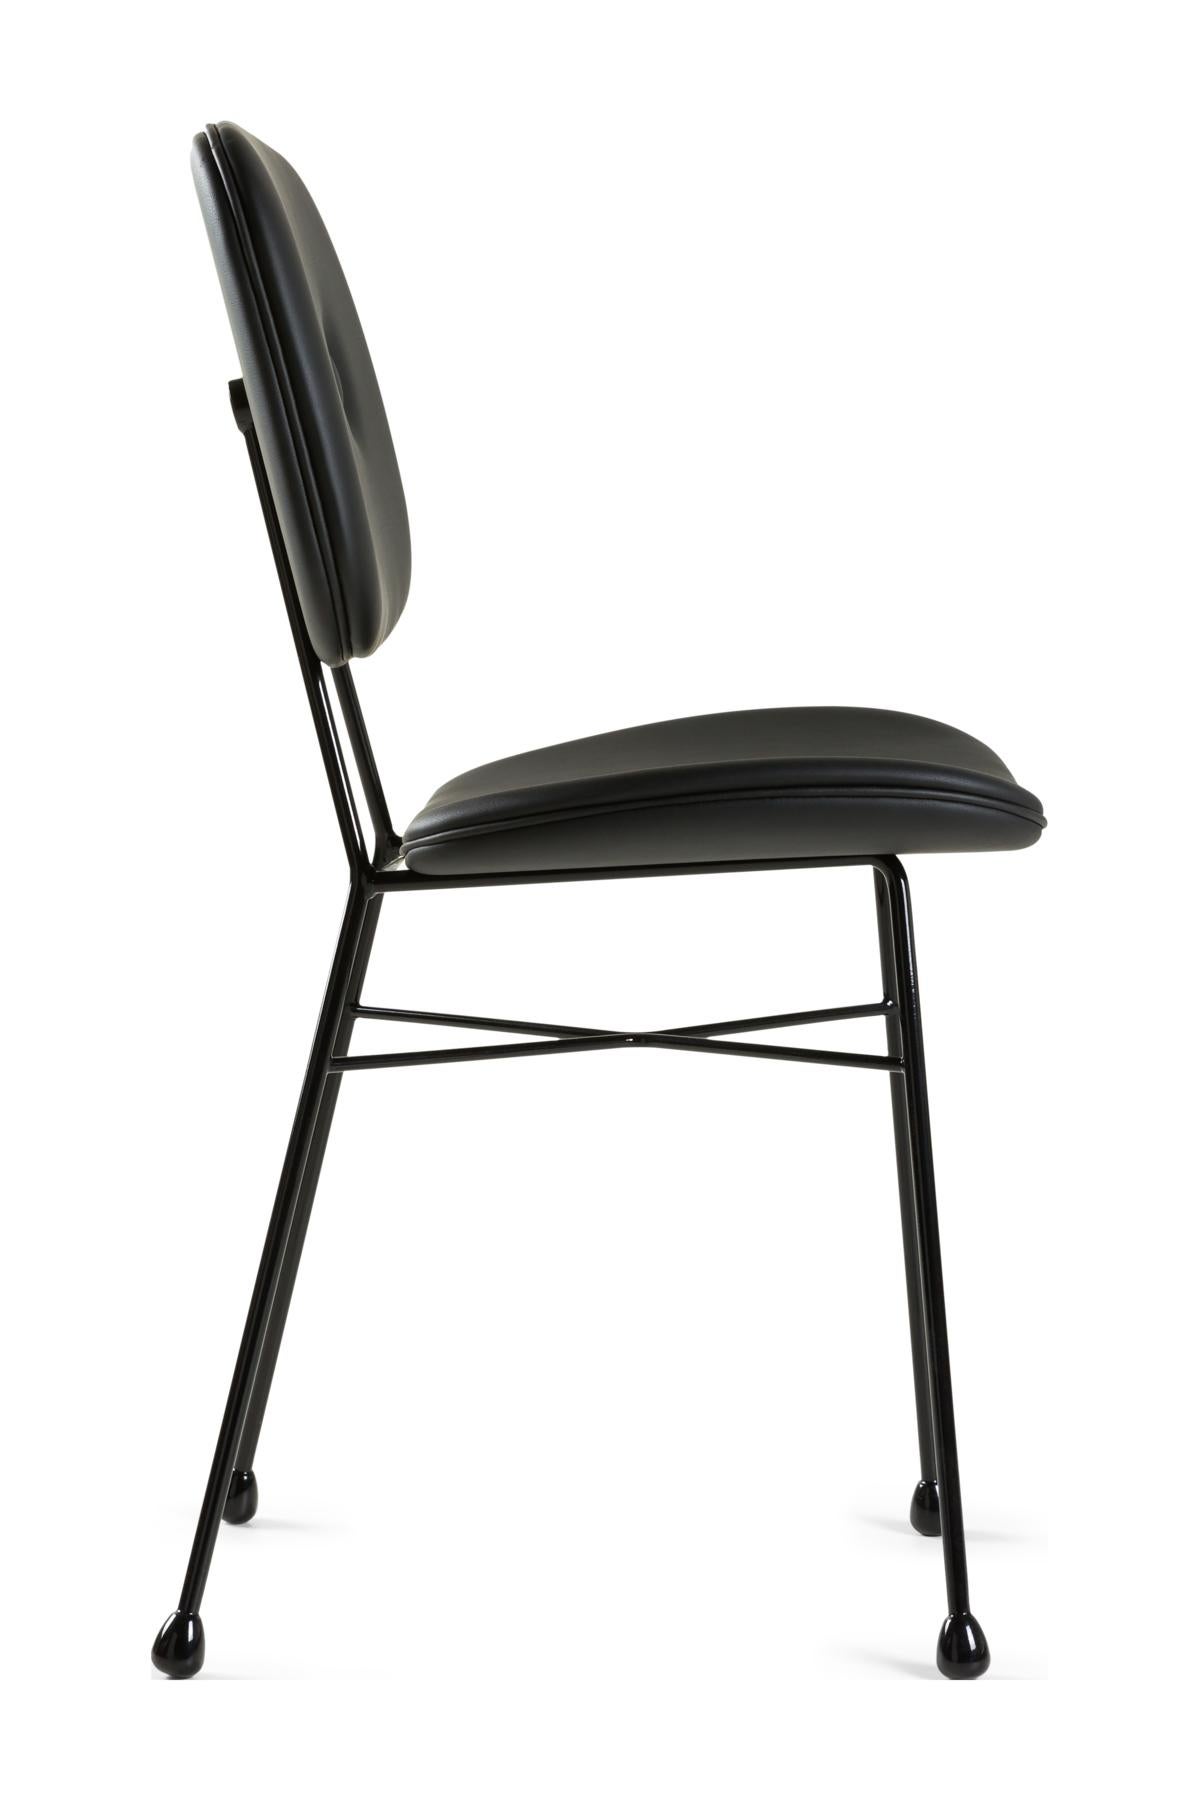 Moooi The Golden Chair in Black Steel Frame with Black Upholstery In New Condition For Sale In Brooklyn, NY